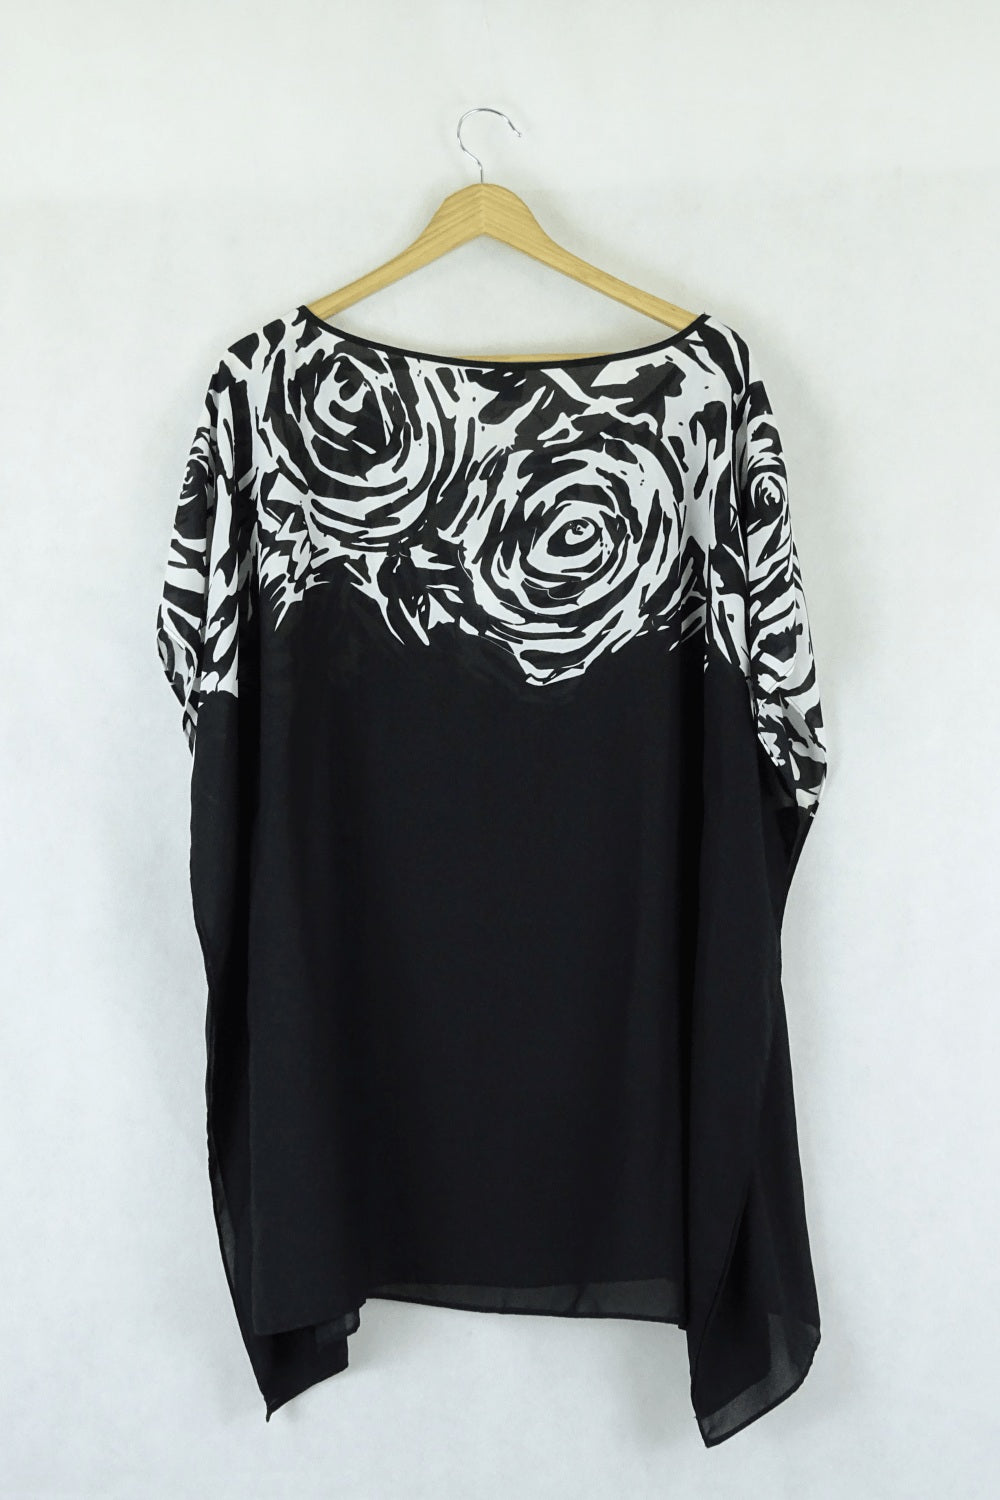 Autograph Sheer Black and White Blouse 14